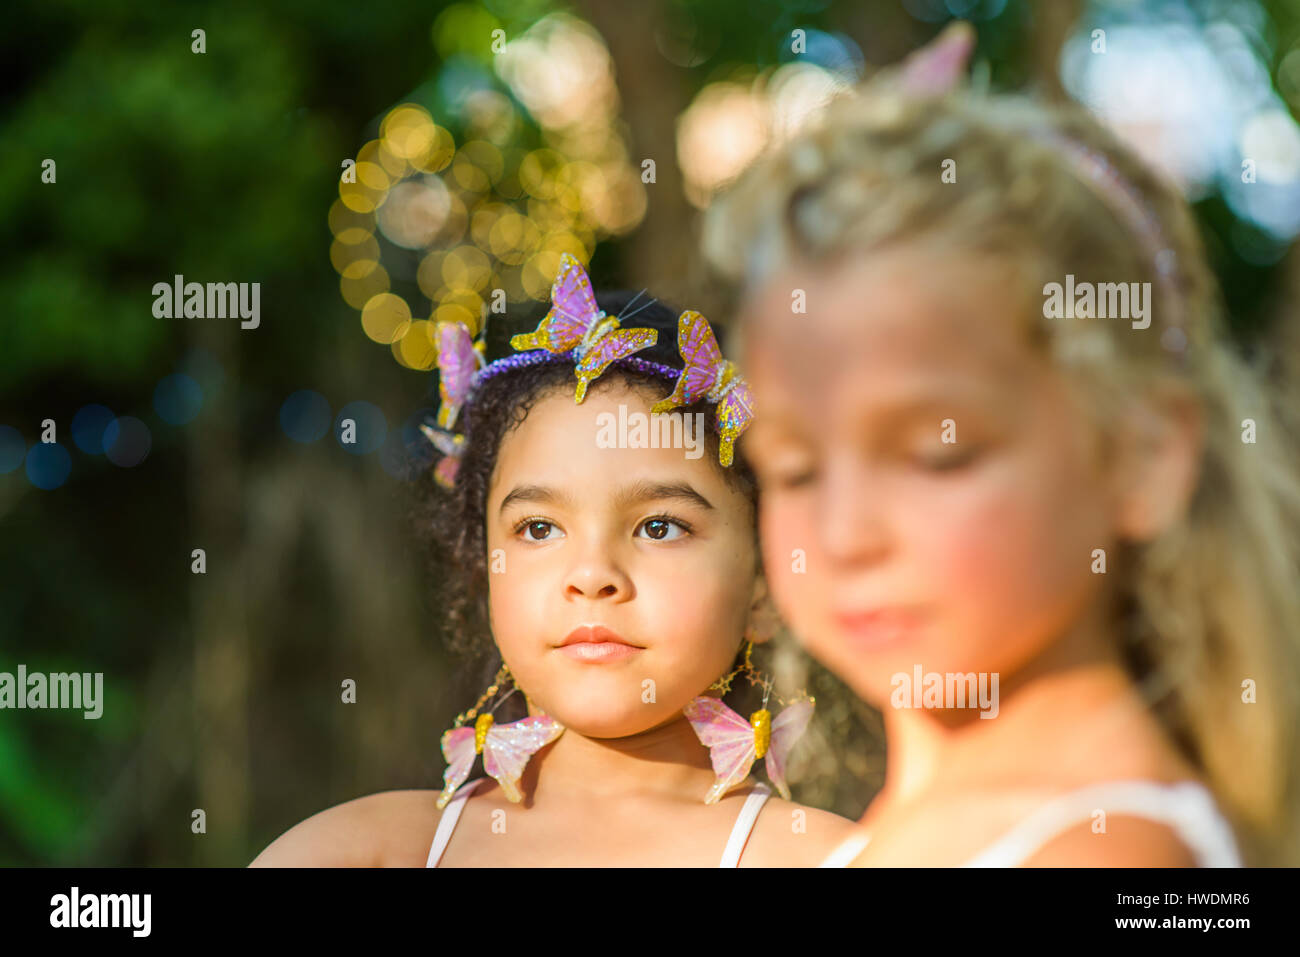 Two young girls, outdoors, wearing butterflies in hair Stock Photo